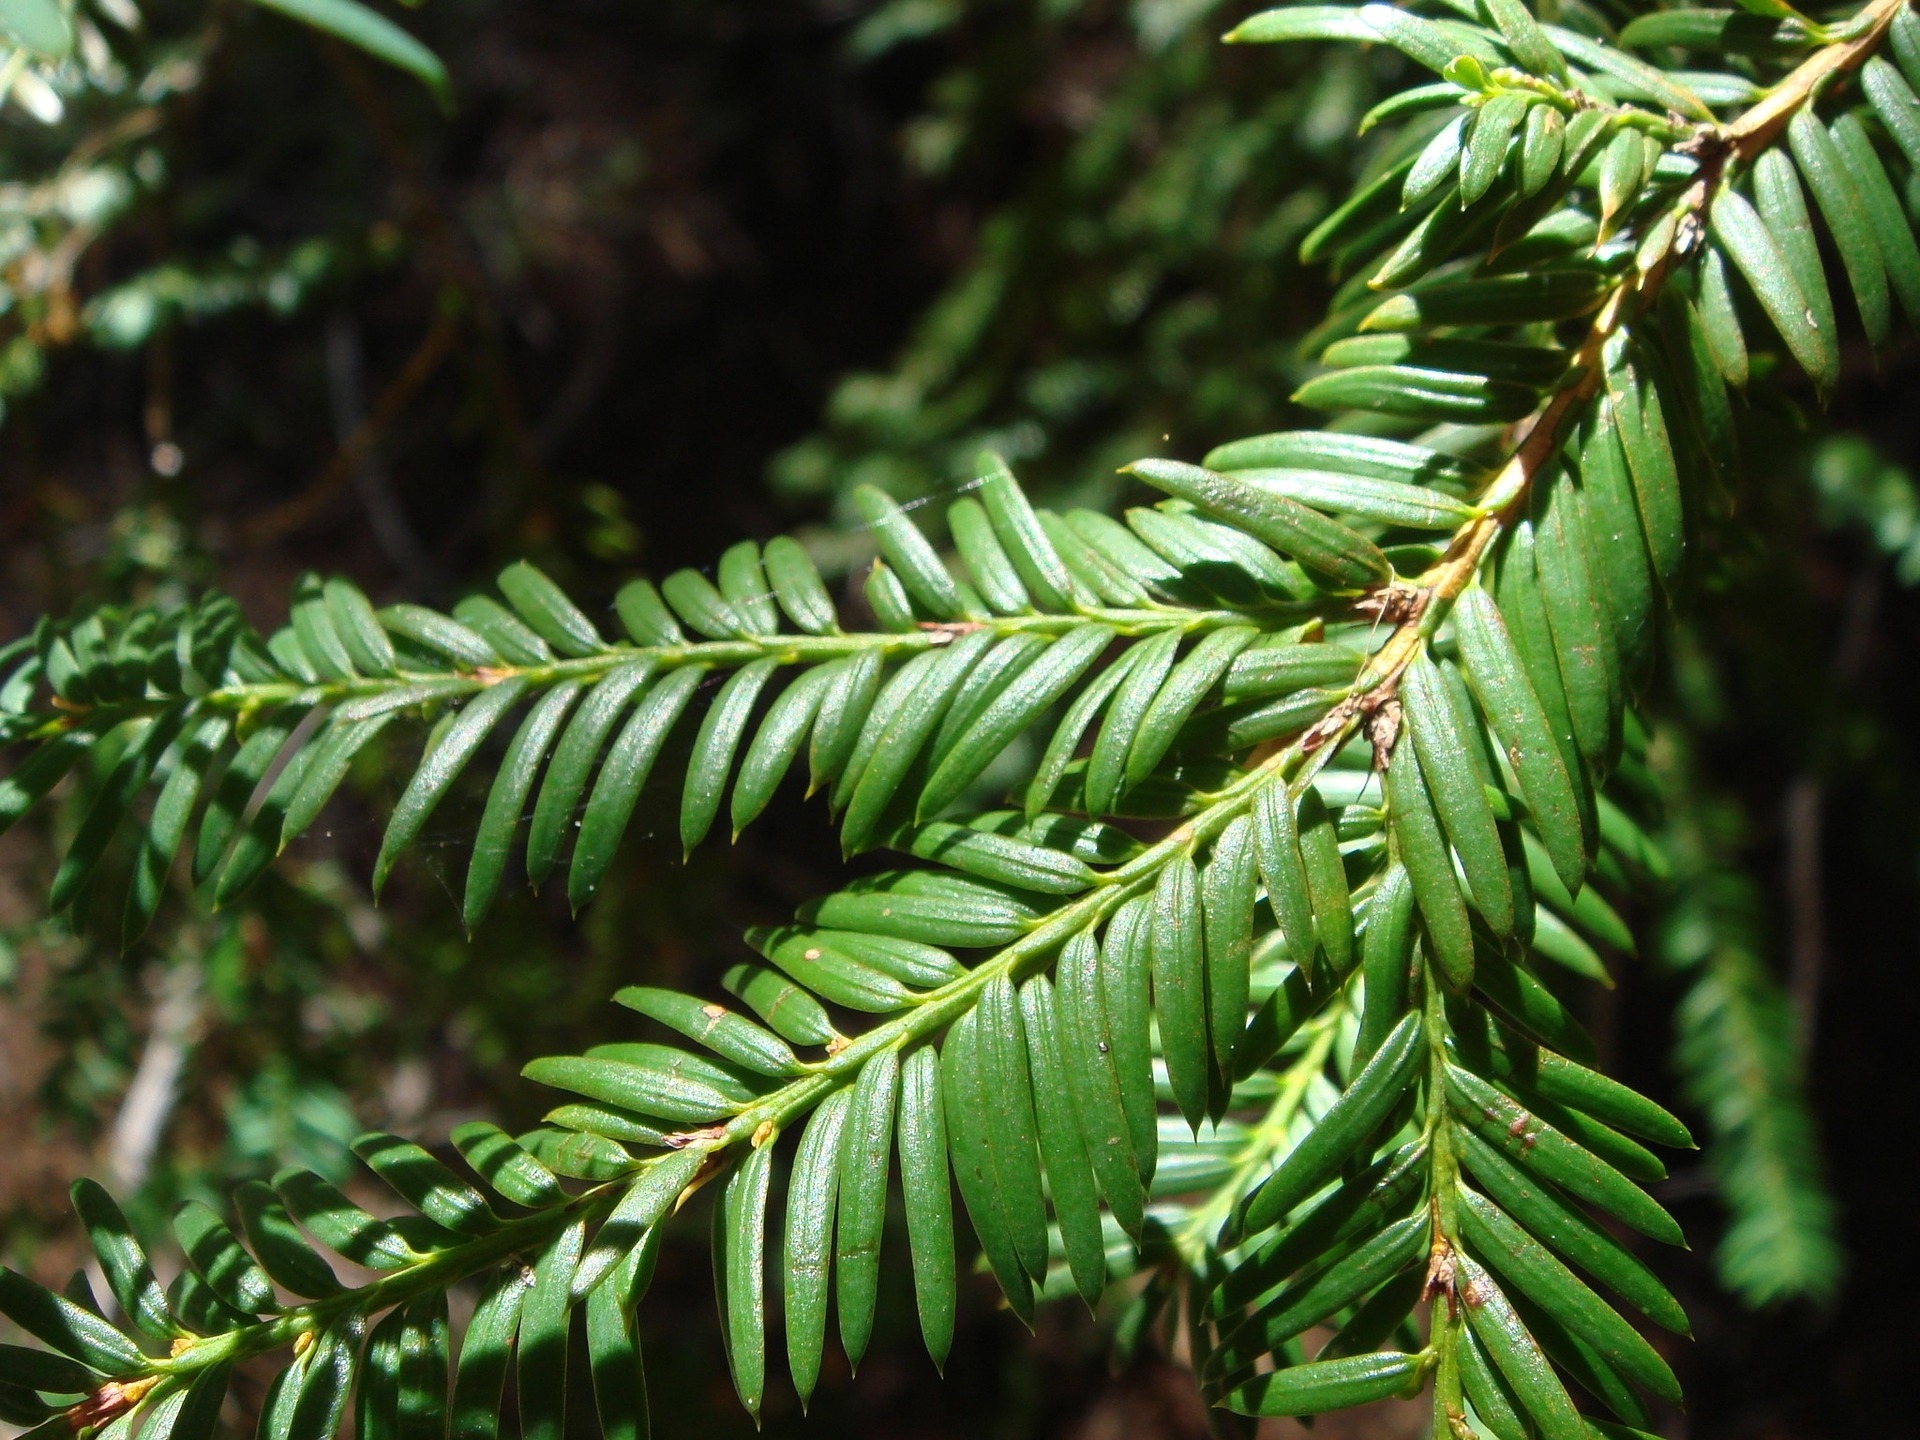 Photograph of Yew leaves in sunlight